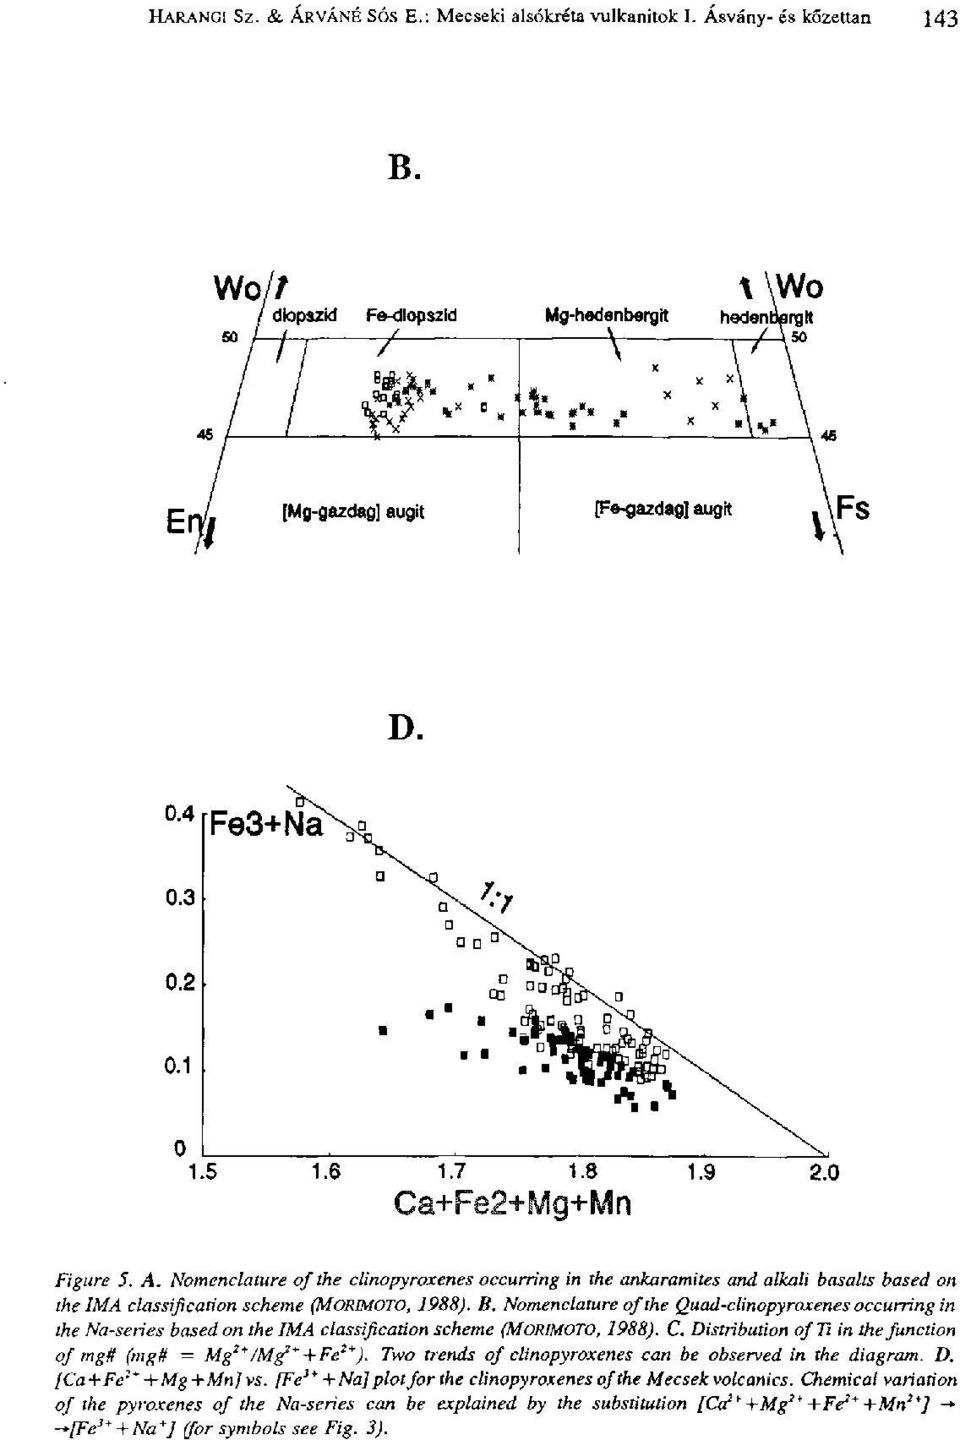 Nomenclature of the Quad-clinopyroxenes occurring in the Na-series based on the IMA classification scheme (MORIMOTO, 1988). C. Distribution ofti in the function of mgh (mgtt = Mg 2 */Mg 2 *+Fe 2 *).